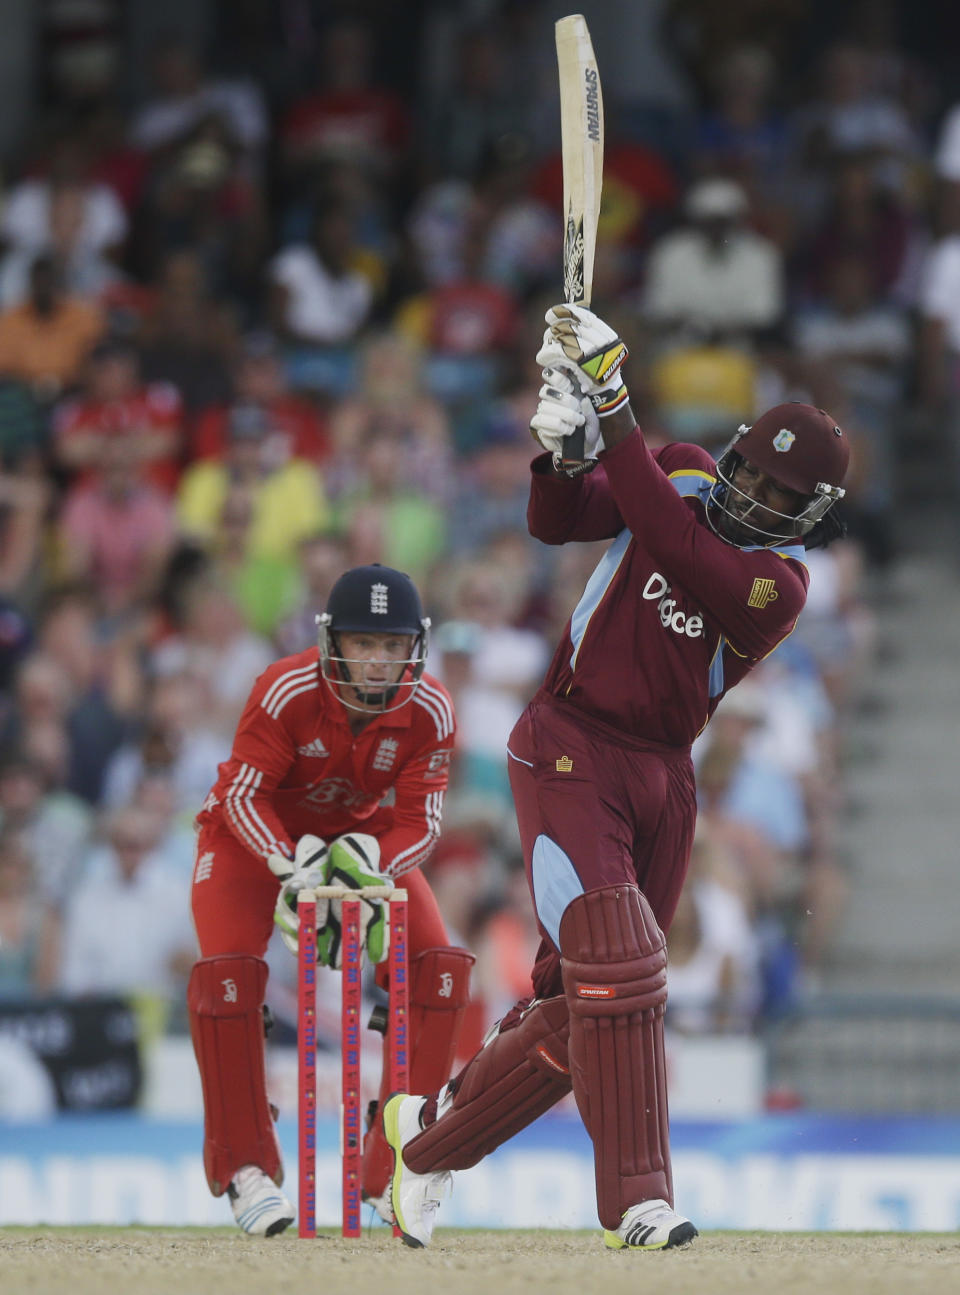 West Indies' Chris Gayle hits a six during the second T20 International cricket match against England at the Kensington Oval in Bridgetown, Barbados, Tuesday, March 11, 2014. (AP Photo/Ricardo Mazalan)